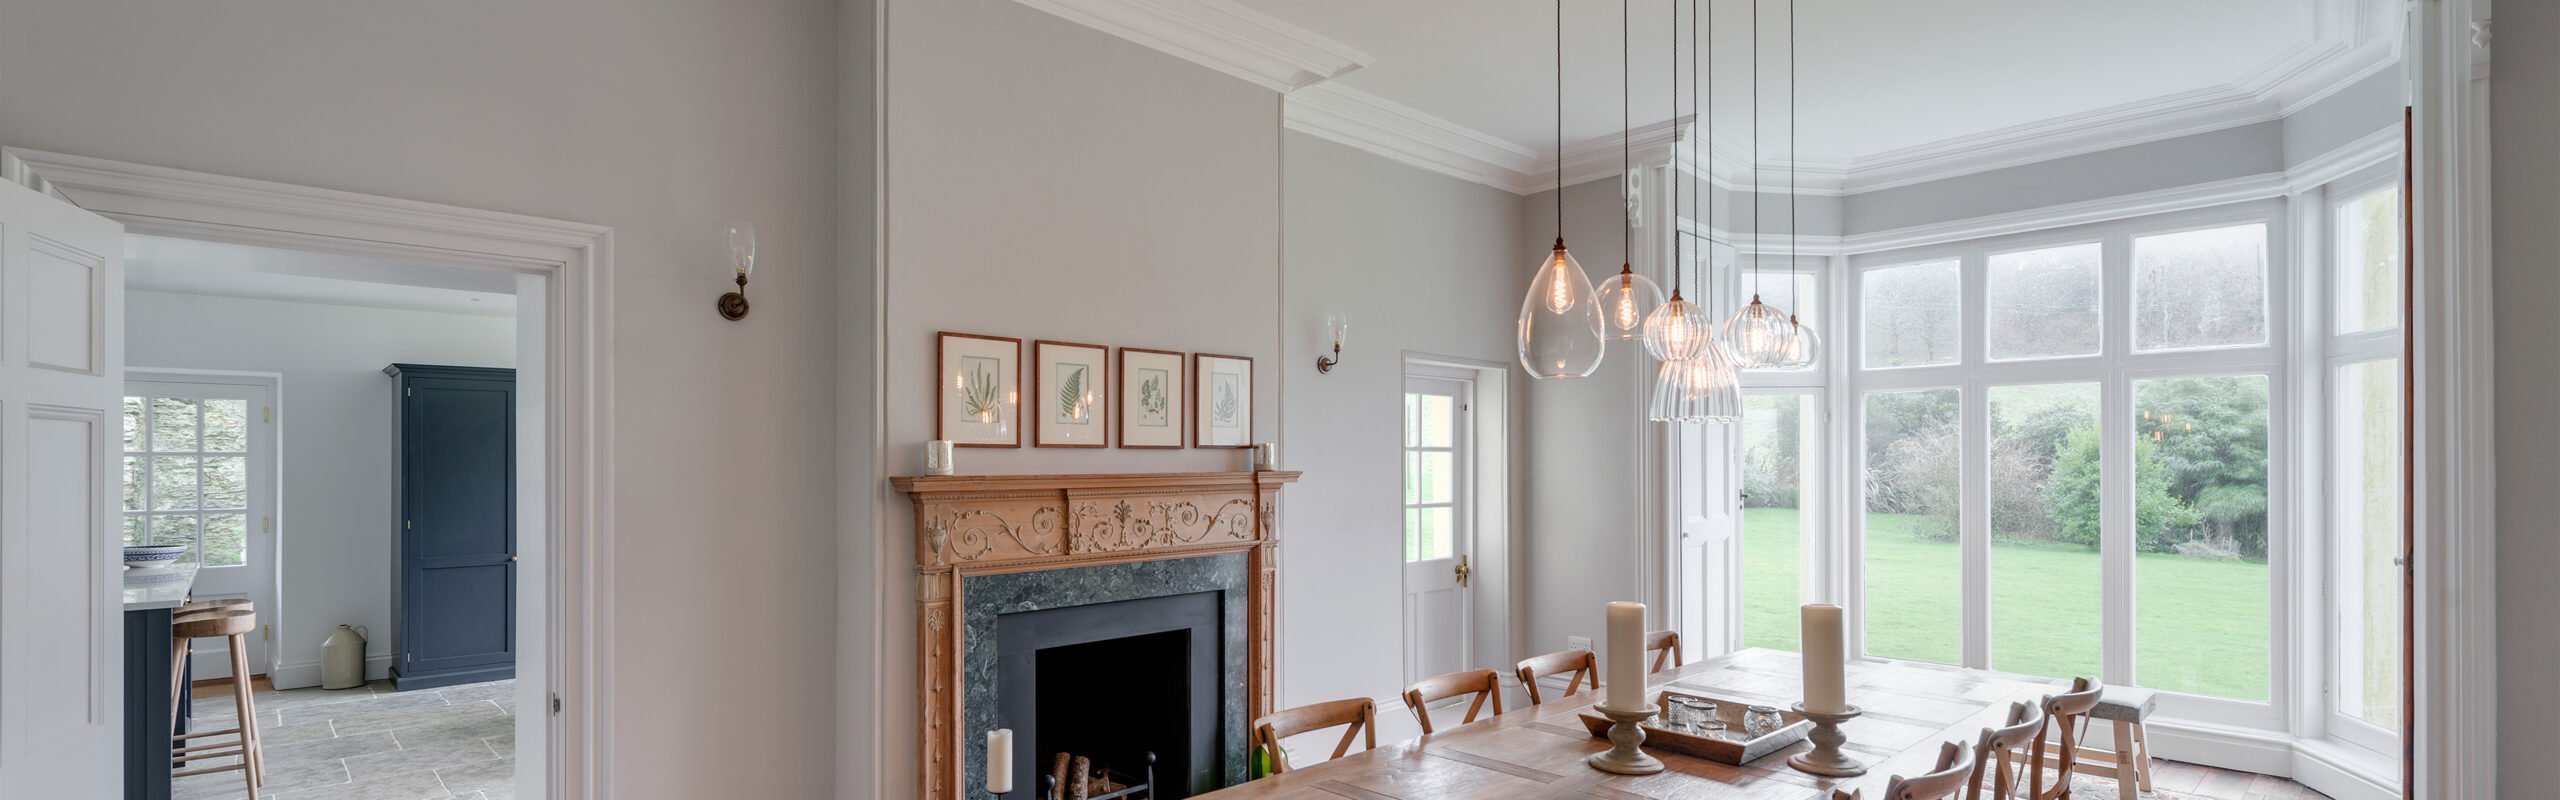 A home with a selection of dining room lighting ideas featuring, pendant lights over the table and wall lights beside the fireplace.